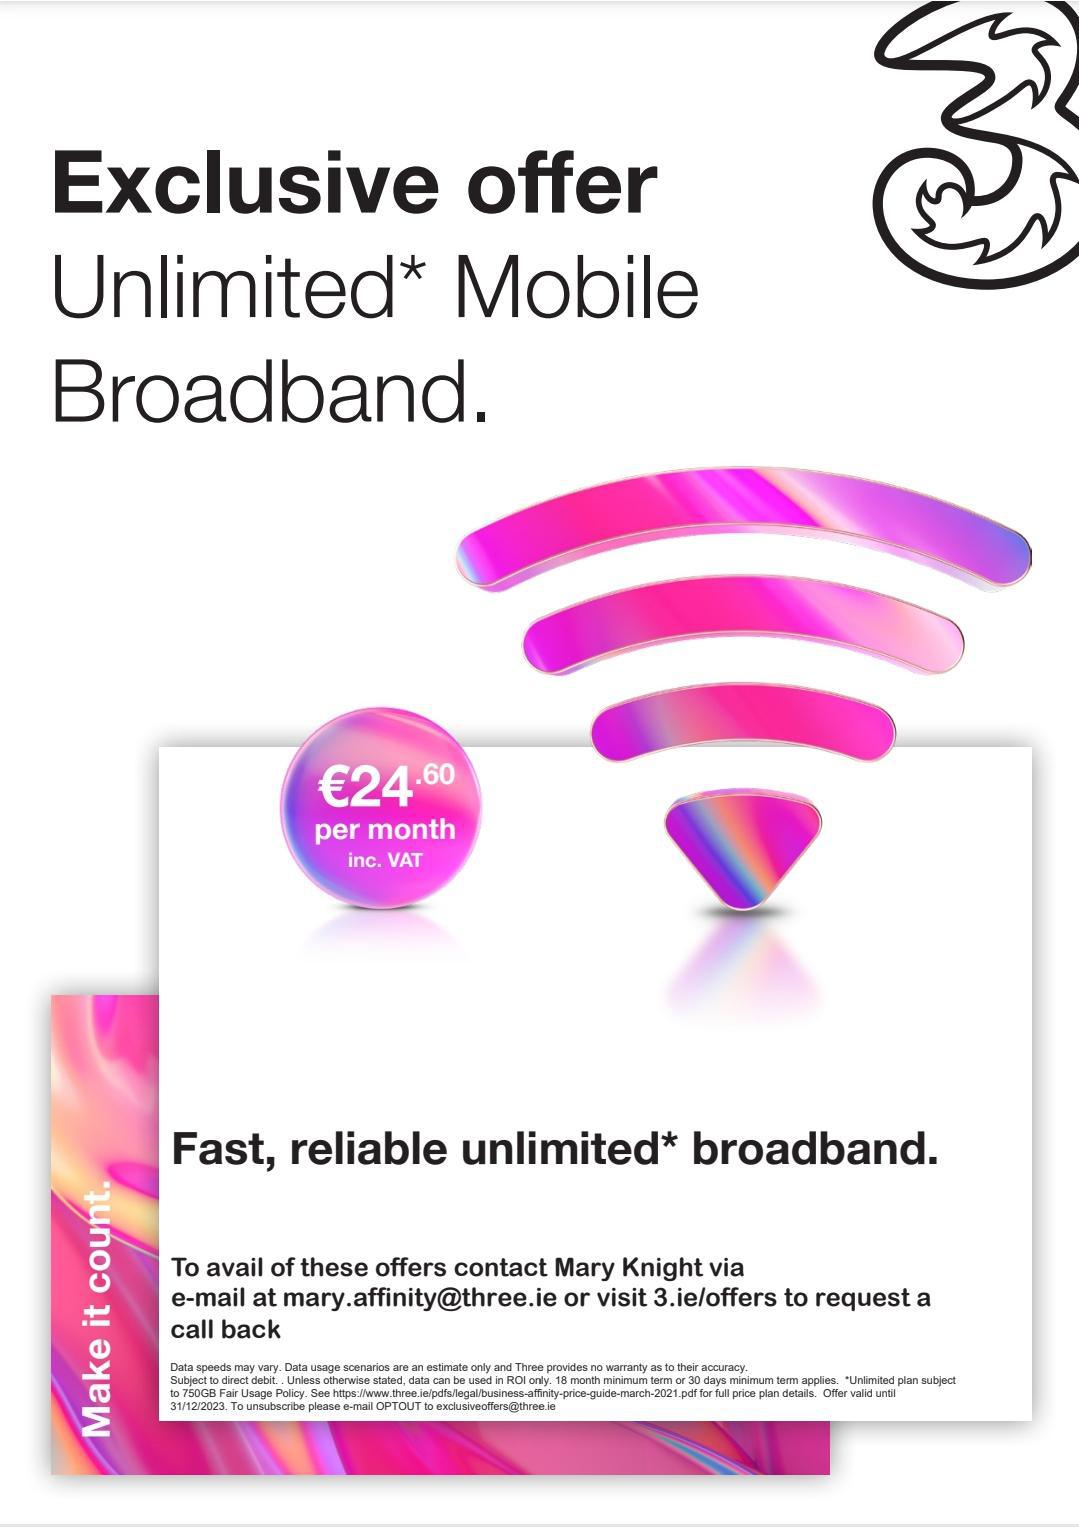 Mobile Phone & Home Broadband Offers with 3